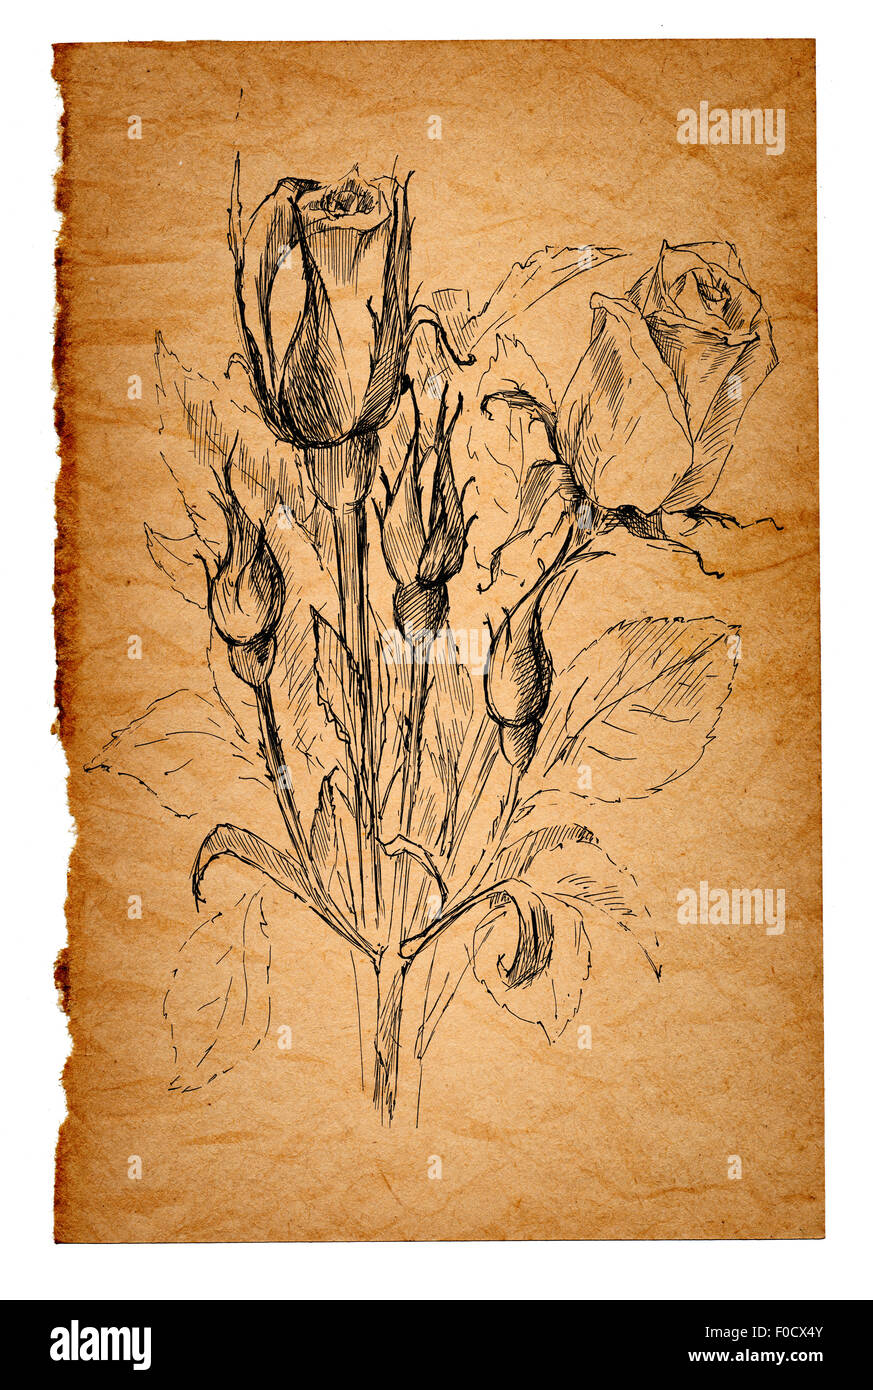 flower sketch on the old paper background Stock Photo